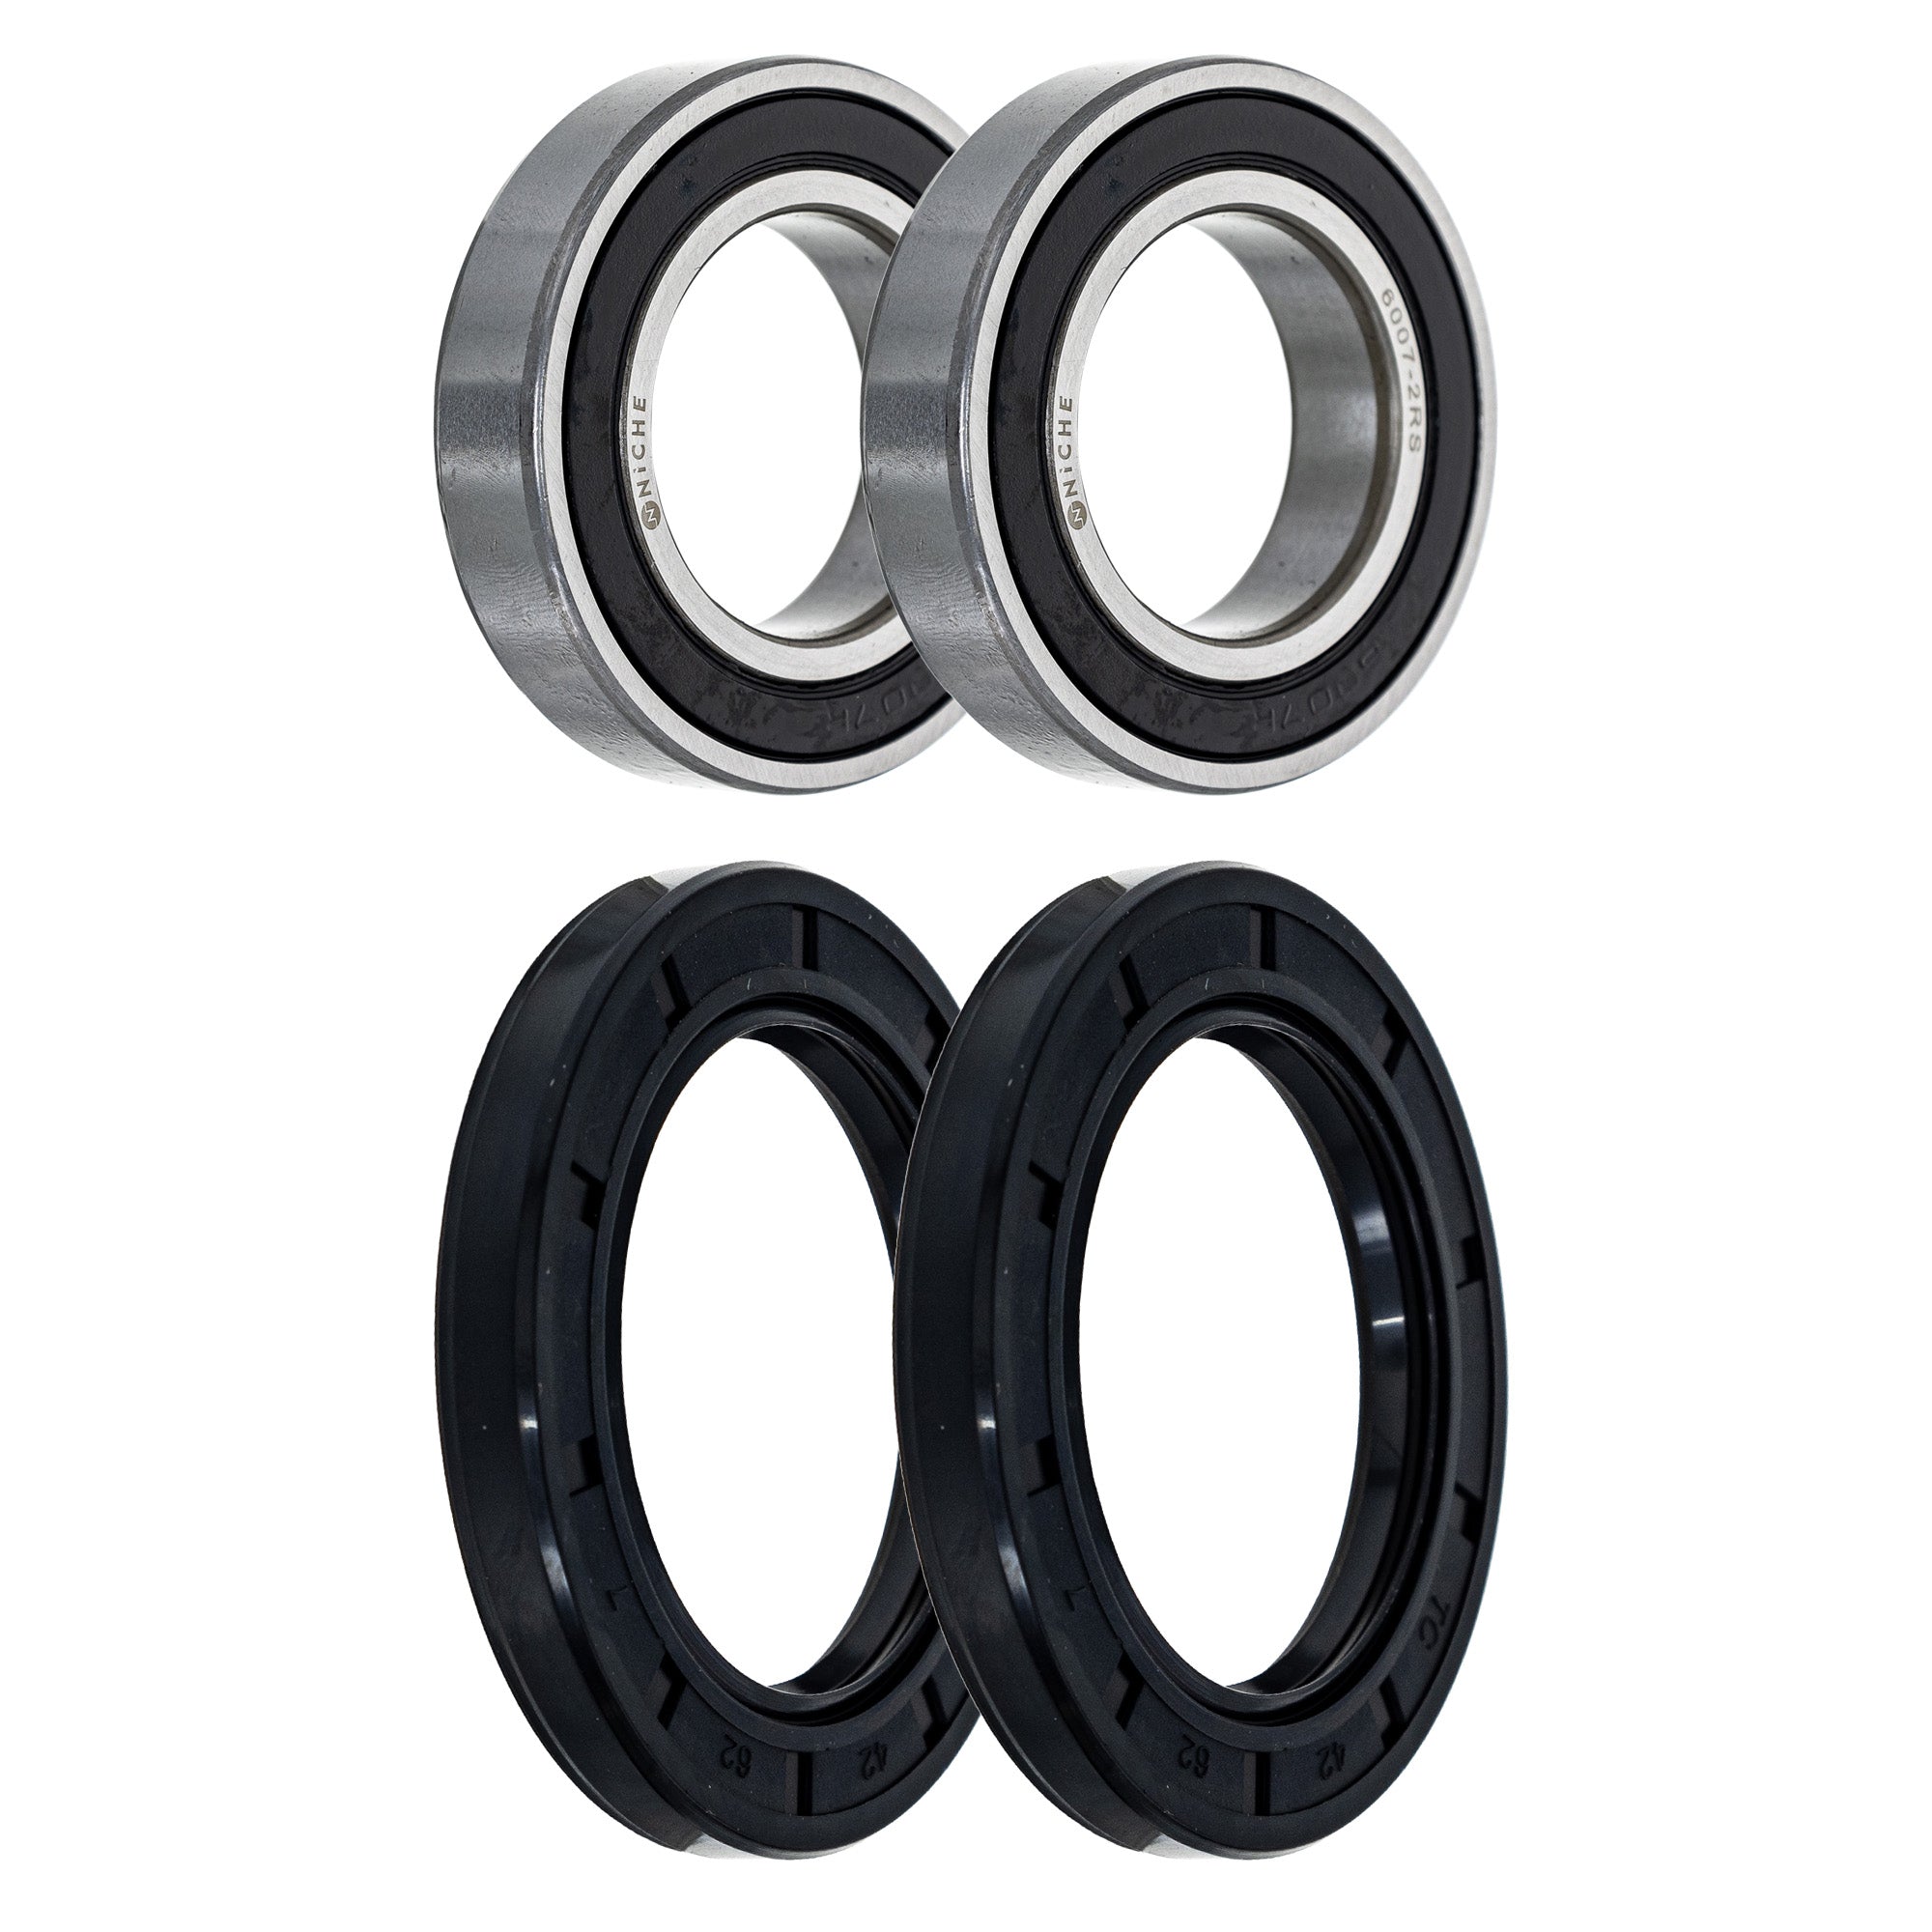 Wheel Bearing Seal Kit for zOTHER Grizzly FourTrax Breeze Blaster NICHE MK1009110